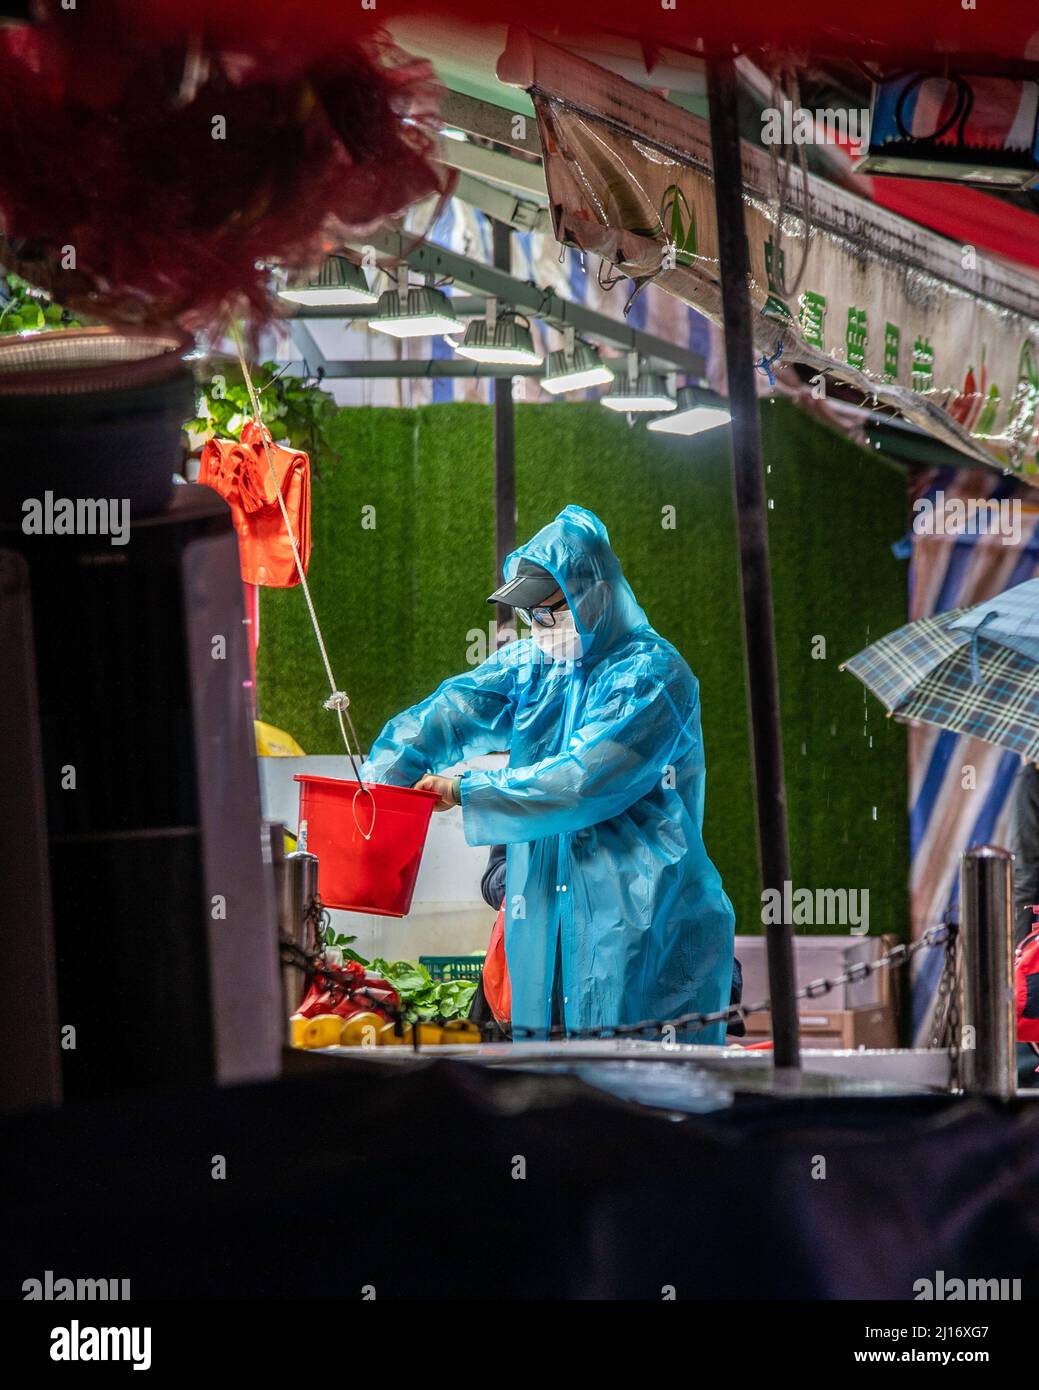 A worker wearing a rain coat grabs change for a customer as a northern monsoon brings cooler weather and rain to Hong Kong. A rainy, spring day in Hong Kong. Stock Photo